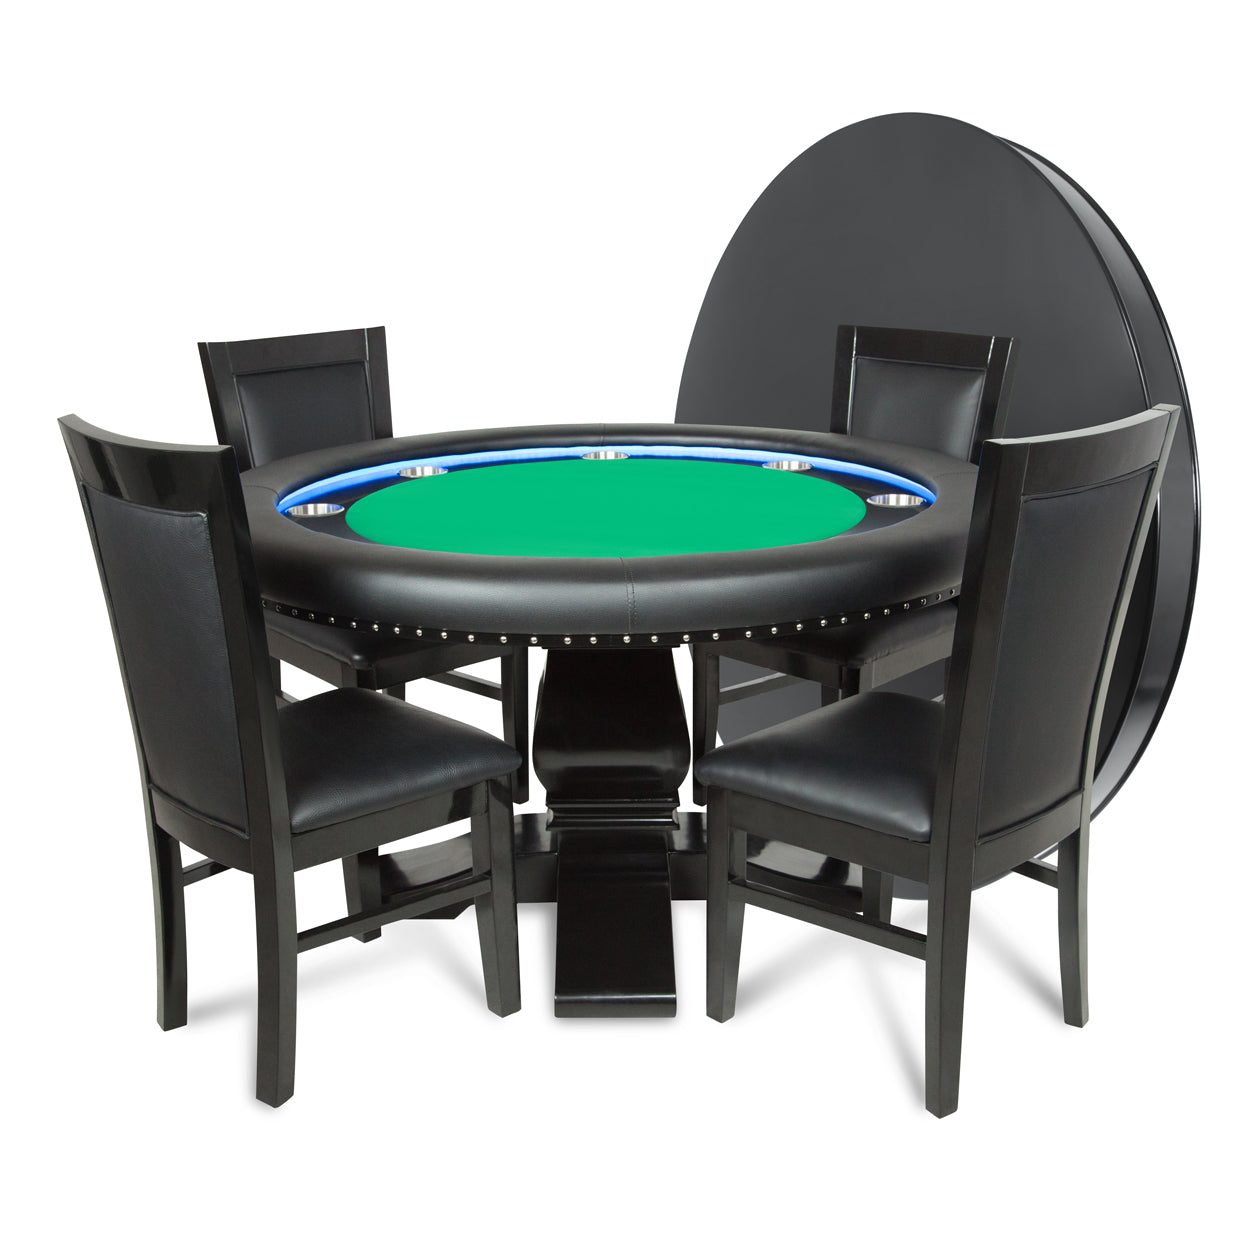 BBO The Ginza LED Premium Poker Table green with dining top and chairs 